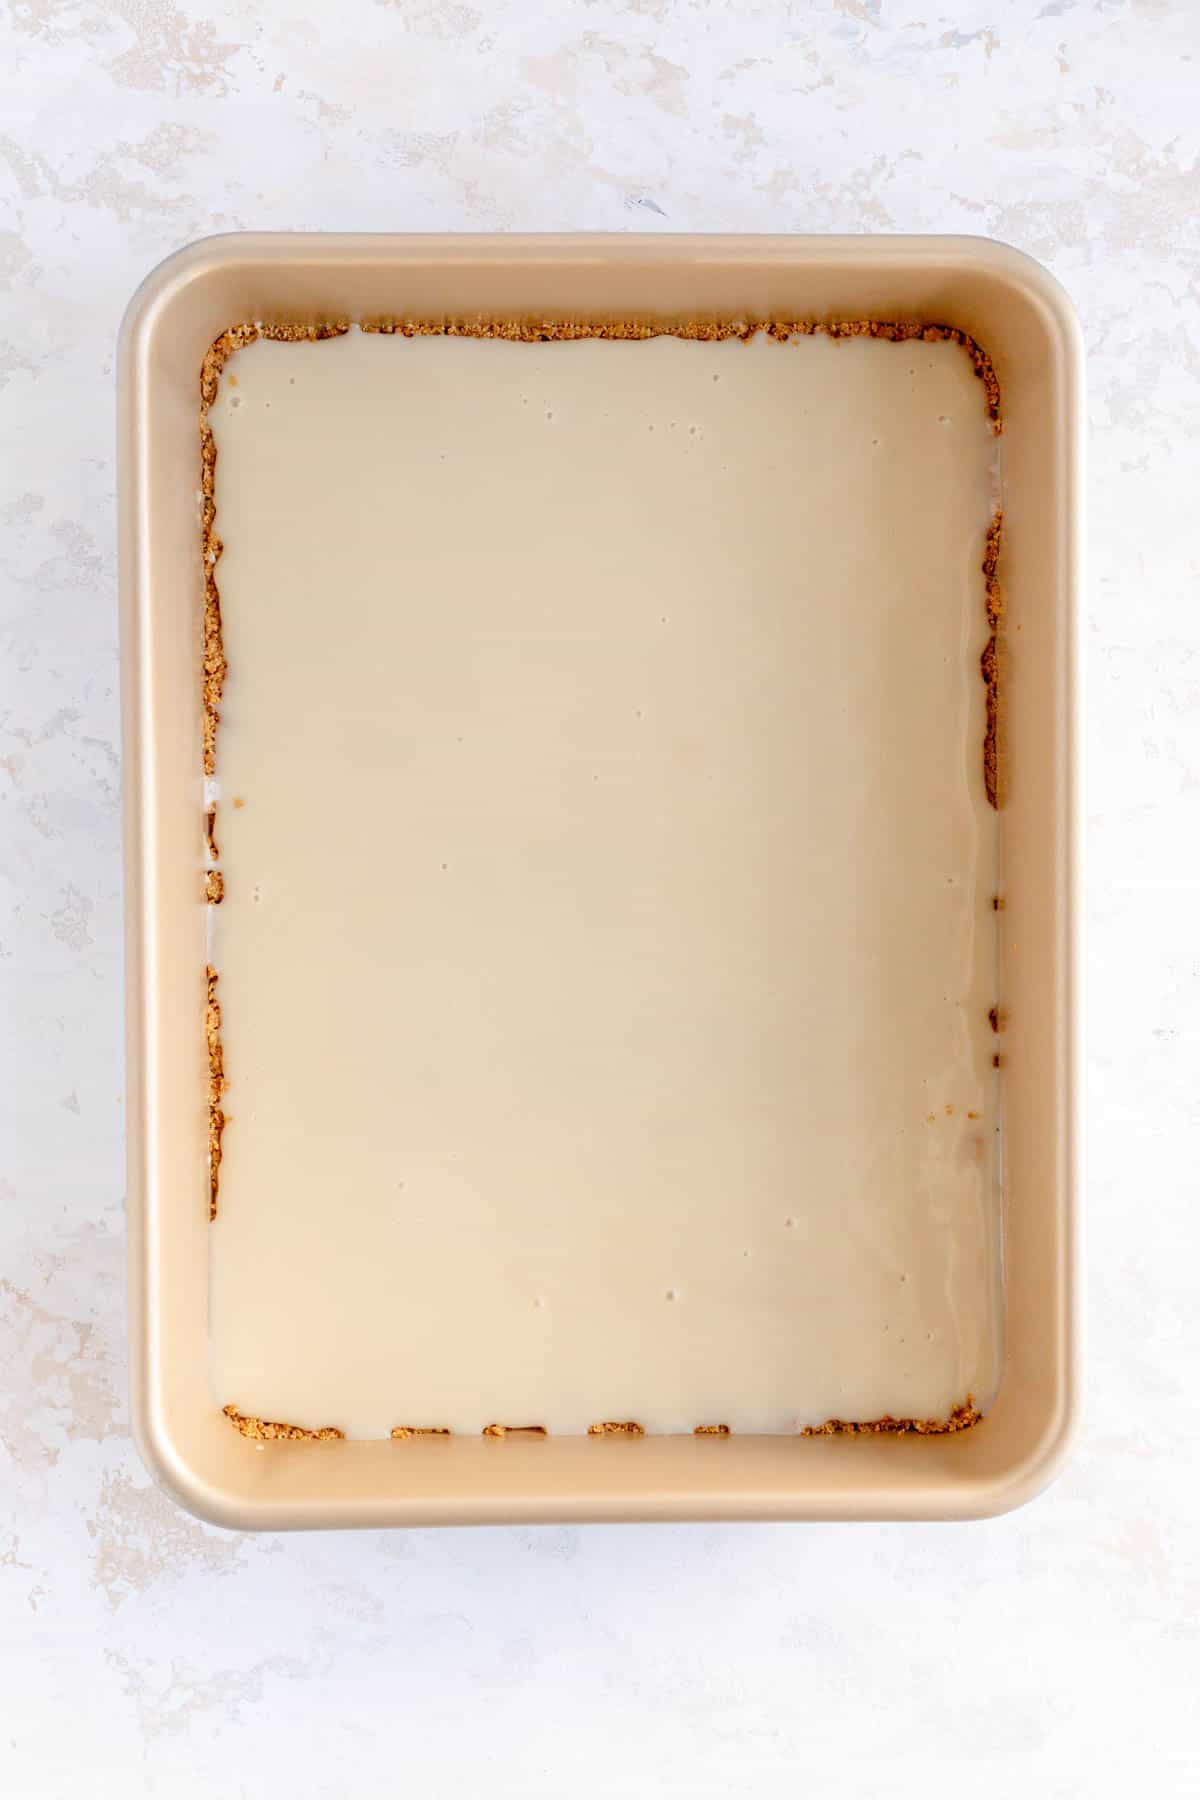 Solid layer of condensed milk over a graham crust in a gold 9 x 13 pan